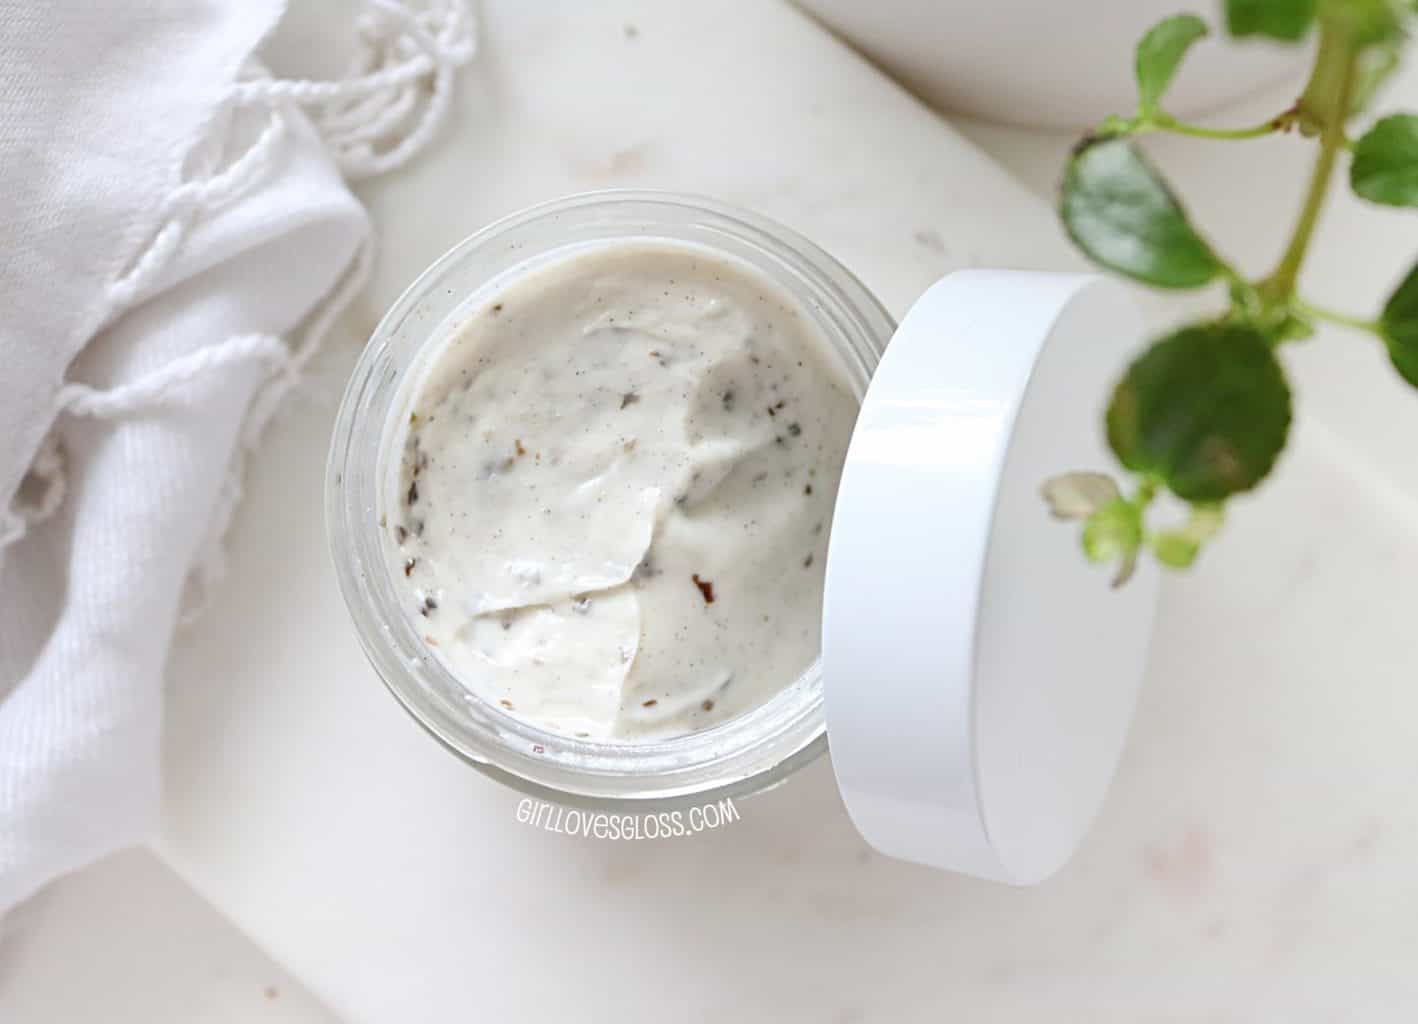 Fresh Lotus Youth Preserve Mask Review